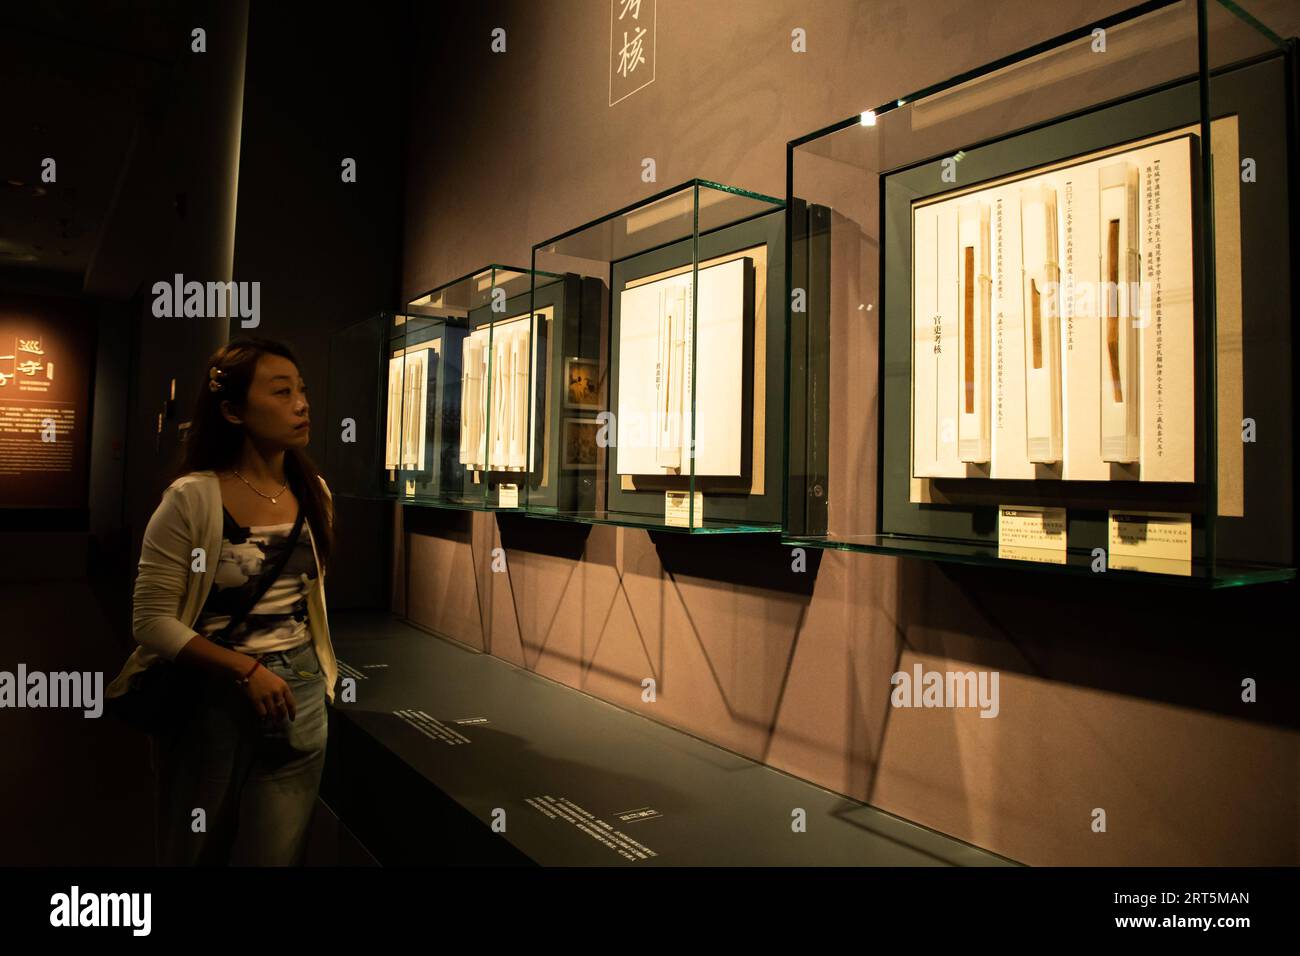 230907 -- LANZHOU, Sept. 7, 2023 -- A visitor views exhibits at the new hall of Gansu bamboo slip museum in Lanzhou, northwest China s Gansu Province, Sept. 7, 2023. The new hall of a bamboo slip museum in Gansu opened on Thursday, with more than 1,000 ancient bamboo slips on display. Most of these slips are being showcased for the first time since they were discovered, including those dating back some 2,000 years to the Han Dynasty 202 BC-AD 220. Located along the Hexi Corridor, part of the ancient Silk Road in northwest China, Gansu has a dry climate, and therefore, the ancient bamboo slips Stock Photo